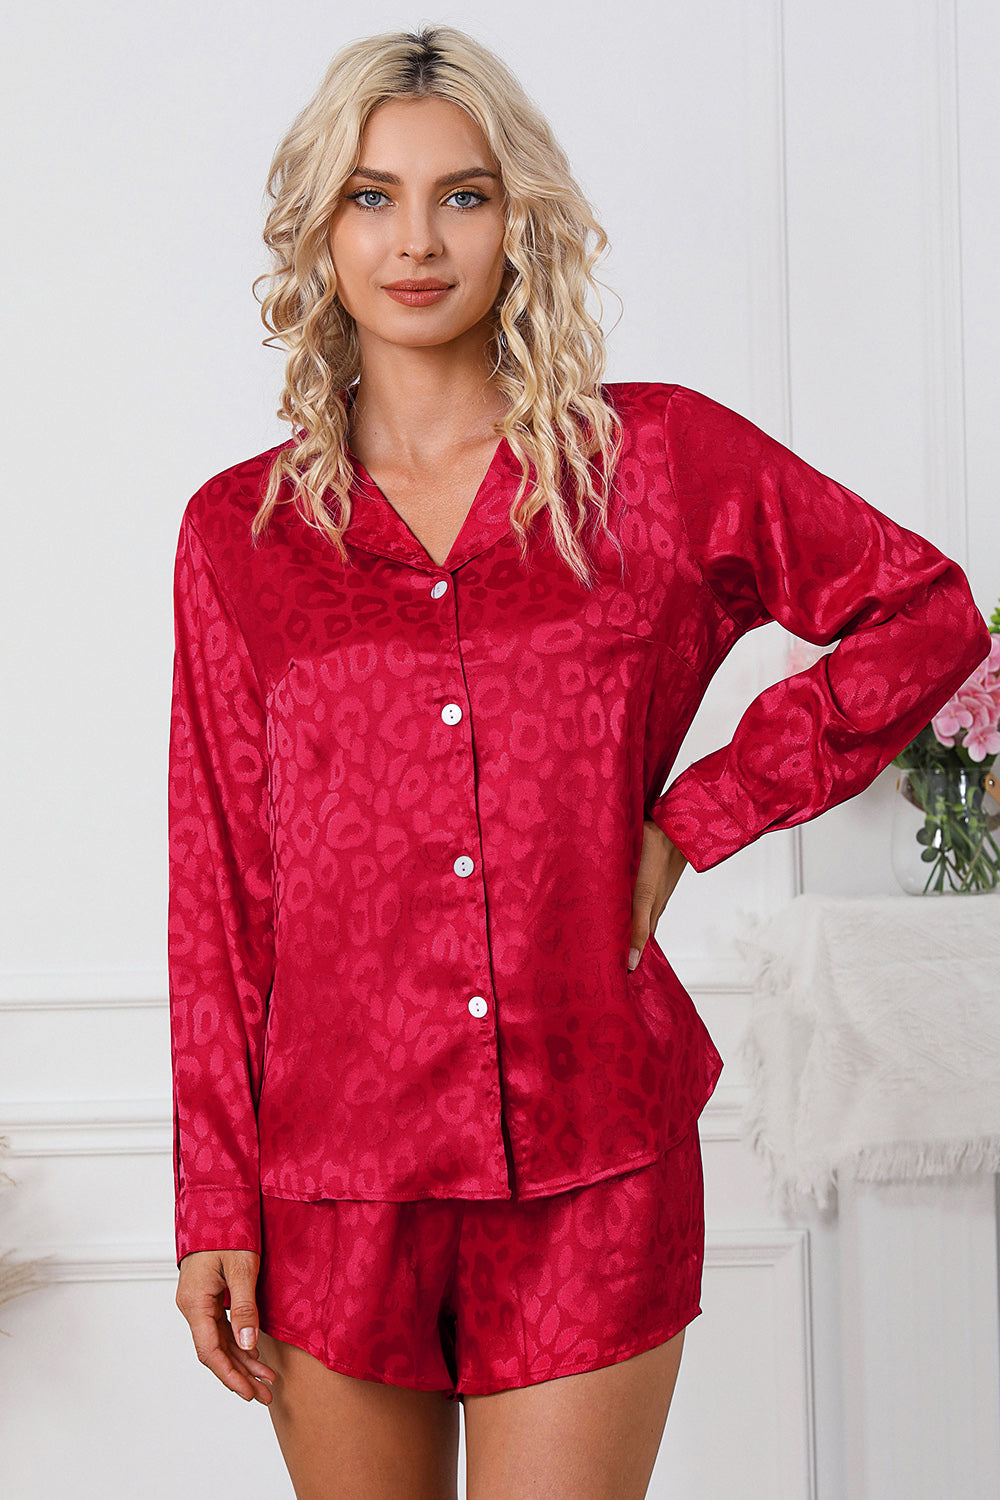 Long Sleeve Shirt and Shorts Lounge Set - pajamas - Wild Willows Boutique - Massapequa, NY, affordable and fashionable clothing for women of all ages. Bottoms, tops, dresses, intimates, outerwear, sweater, shoes, accessories, jewelry, active wear, and more // Wild Willow Boutique.